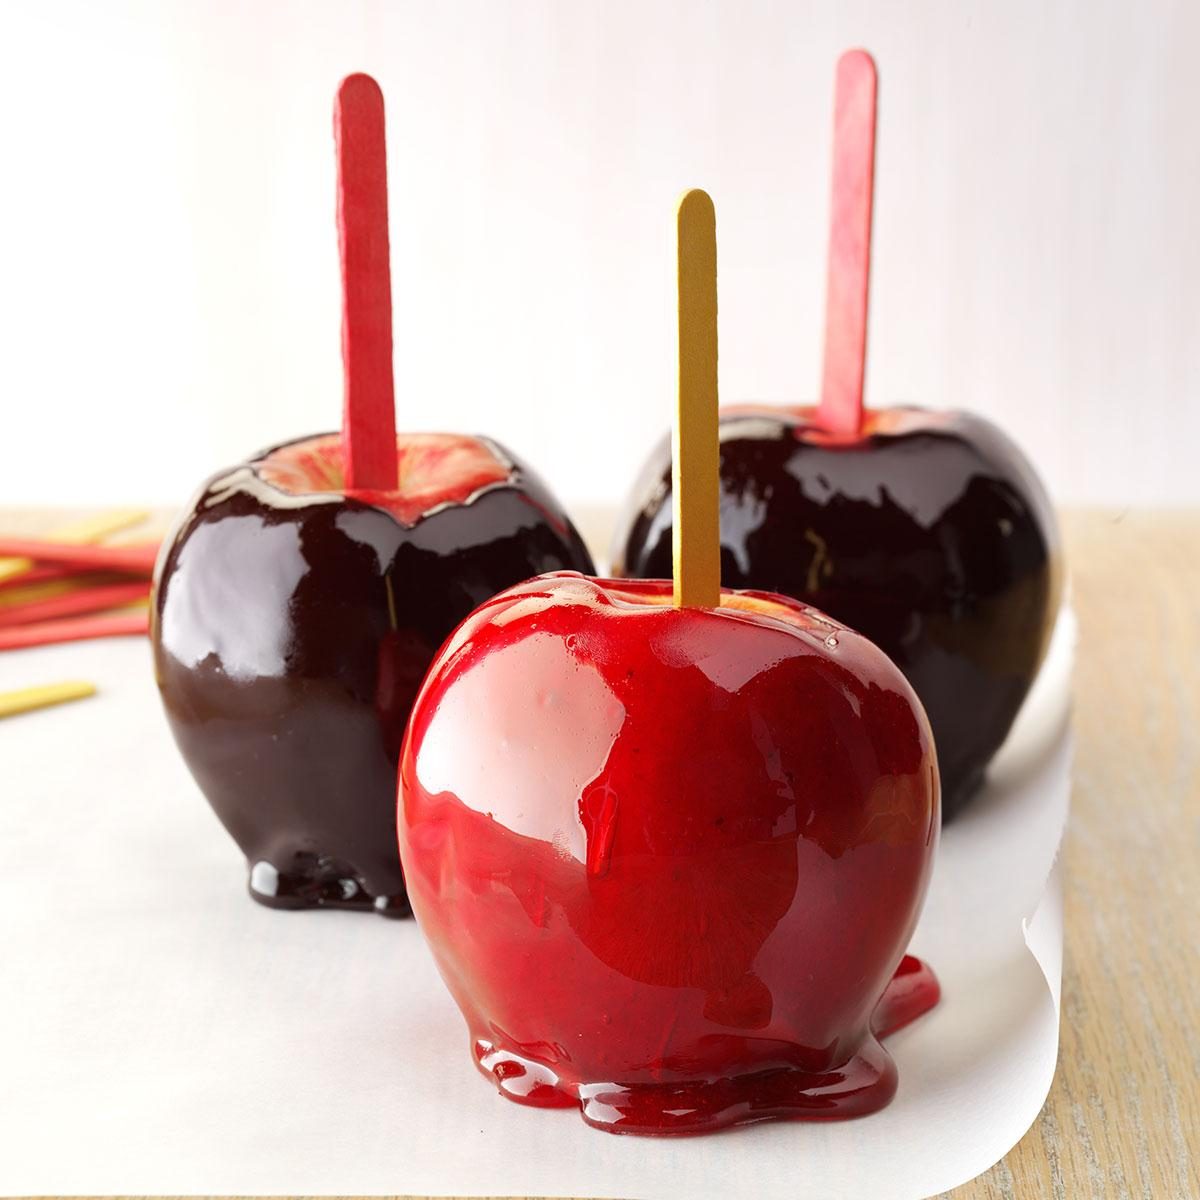 Black-Hearted Candy Apples Recipe | Taste of Home1200 x 1200